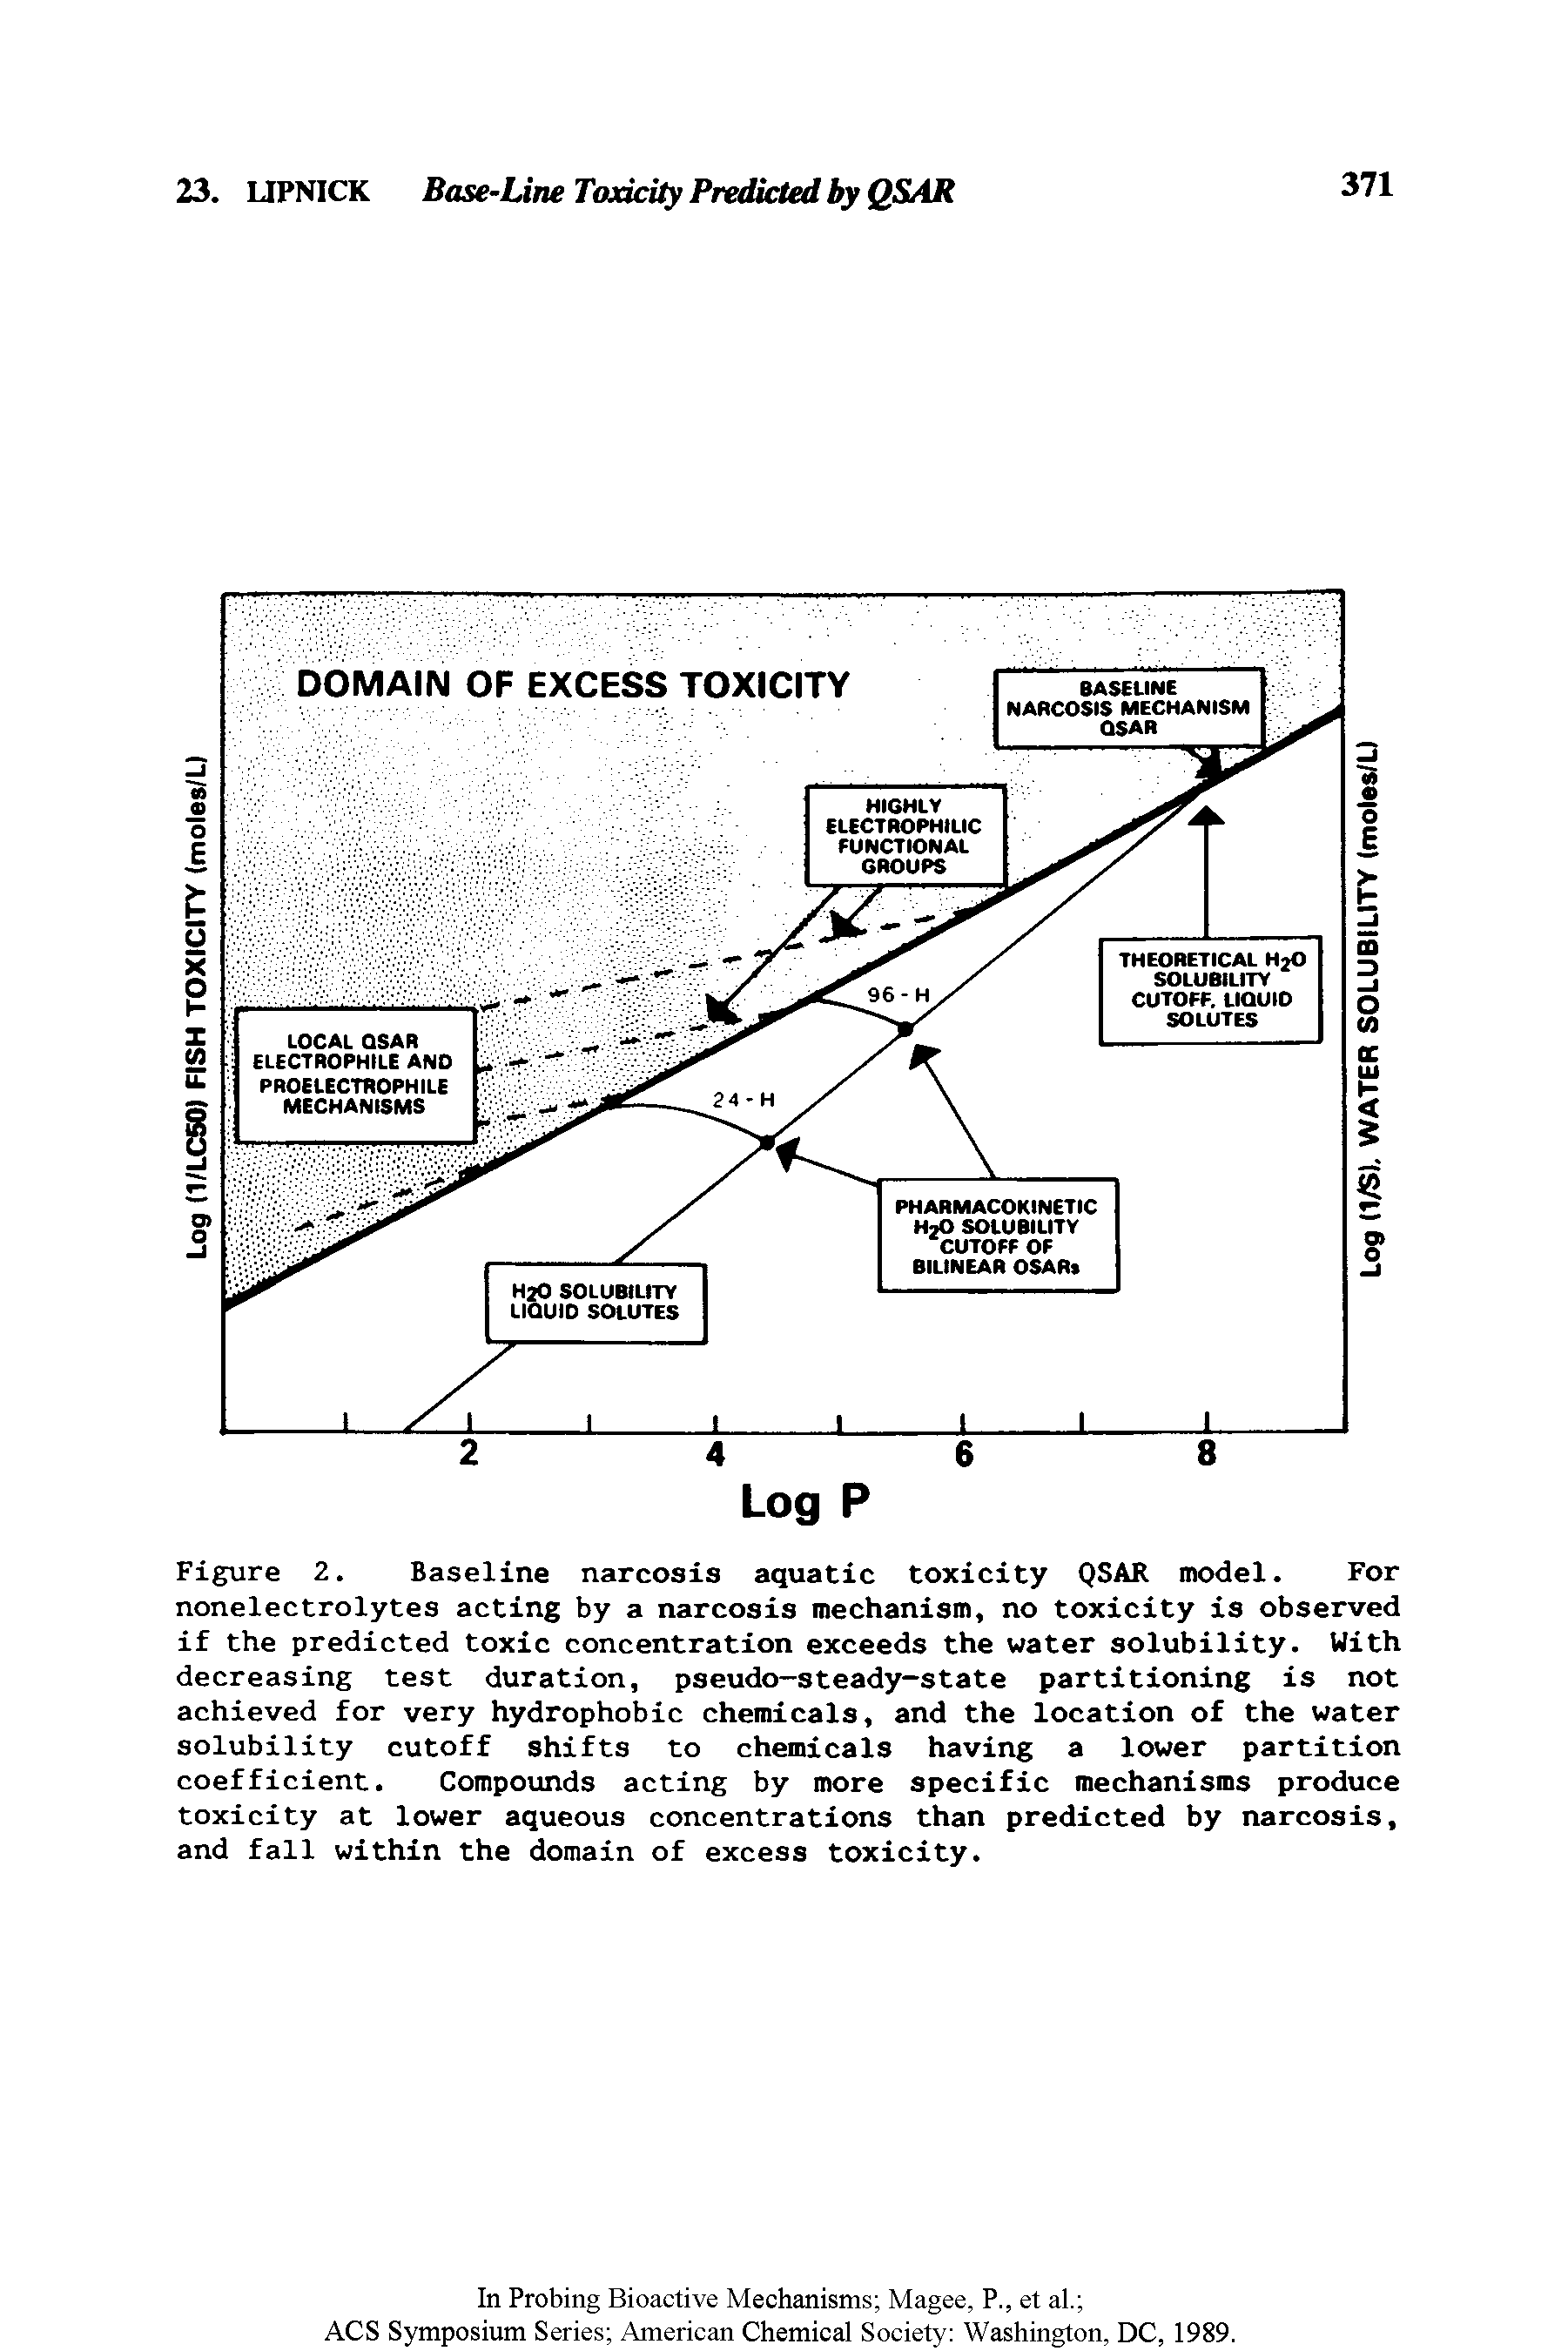 Figure 2. Baseline narcosis aquatic toxicity QSAR model. For nonelectrolytes acting by a narcosis mechanism, no toxicity is observed if the predicted toxic concentration exceeds the water solubility. With decreasing test duration, pseudo-steady-state partitioning is not achieved for very hydrophobic chemicals, and the location of the water solubility cutoff shifts to chemicals having a lower partition coefficient. Compounds acting by more specific mechanisms produce toxicity at lower aqueous concentrations than predicted by narcosis, and fall within the domain of excess toxicity.